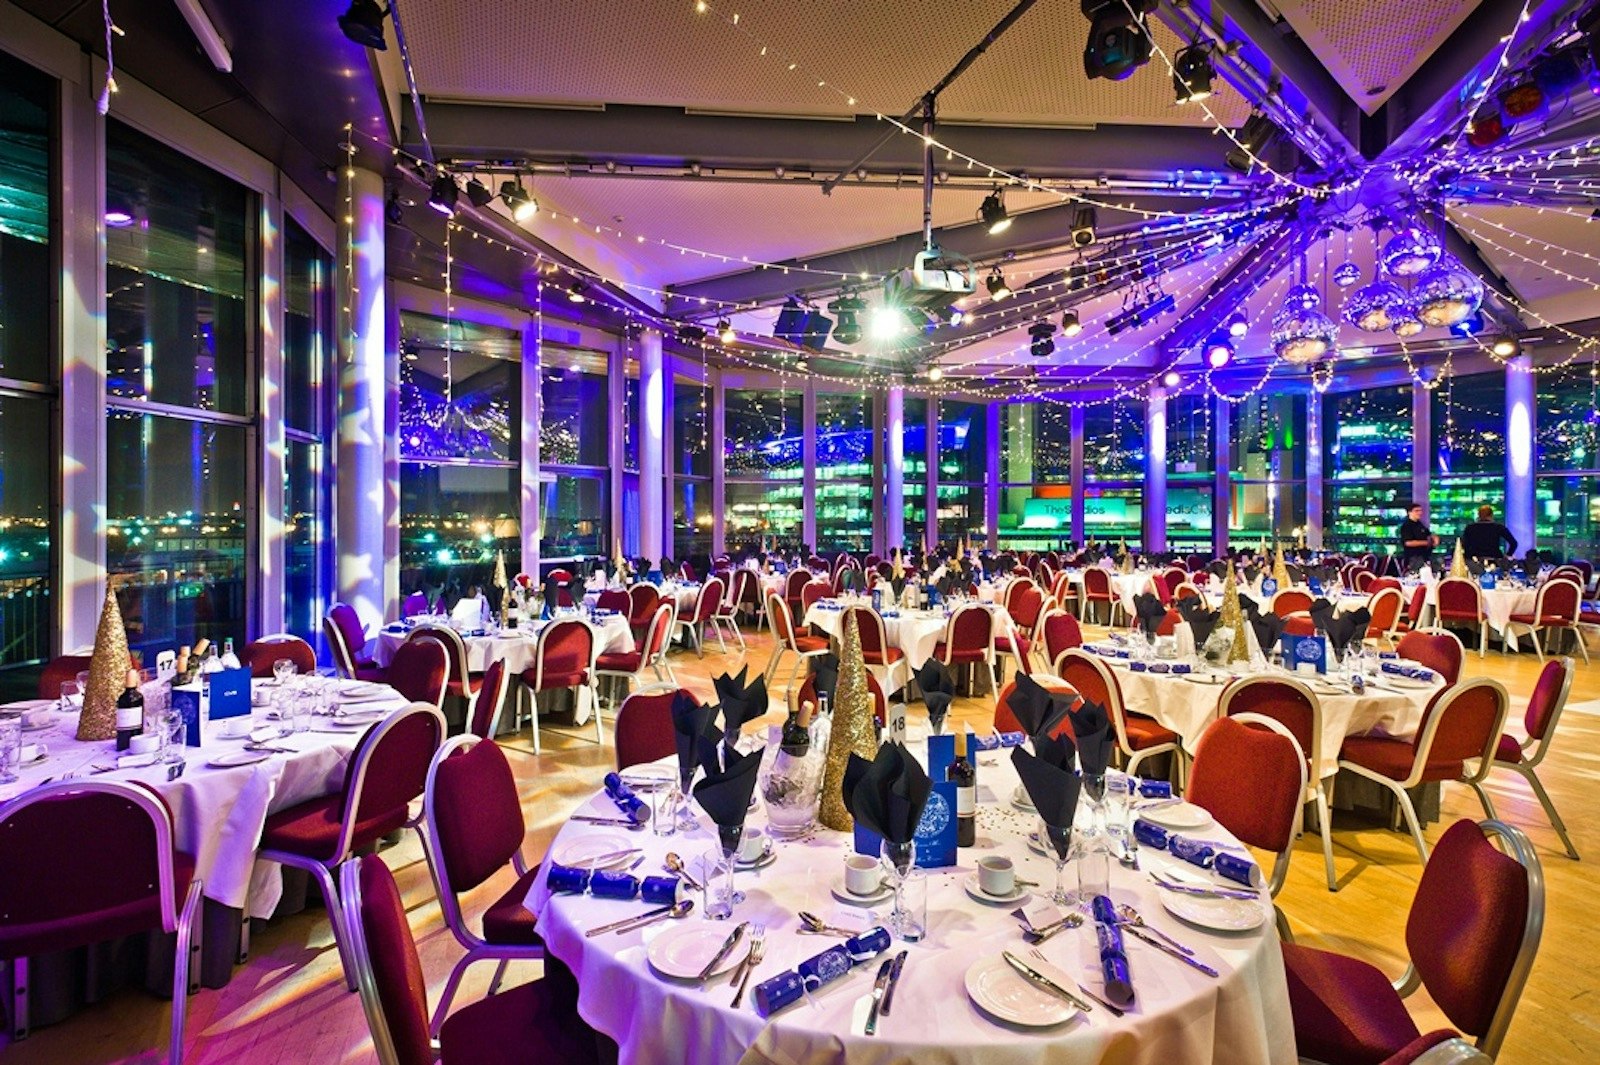 Gala Dinner Venues in Manchester - The Lowry